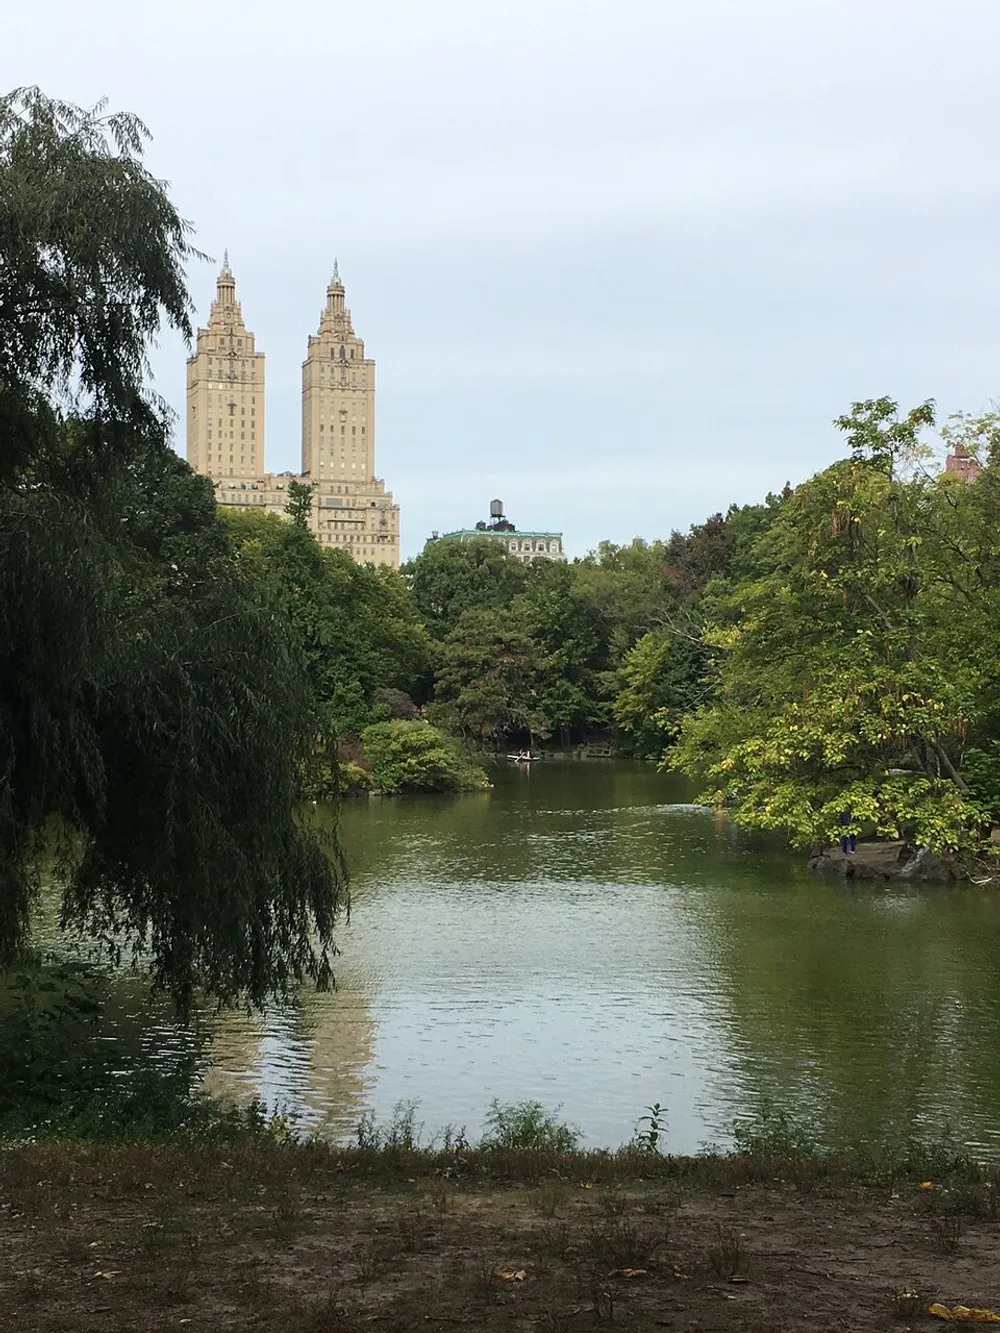 The image shows a calm pond surrounded by greenery with the iconic twin-towered facade of the San Remo apartments rising in the background likely taken from within Central Park New York City